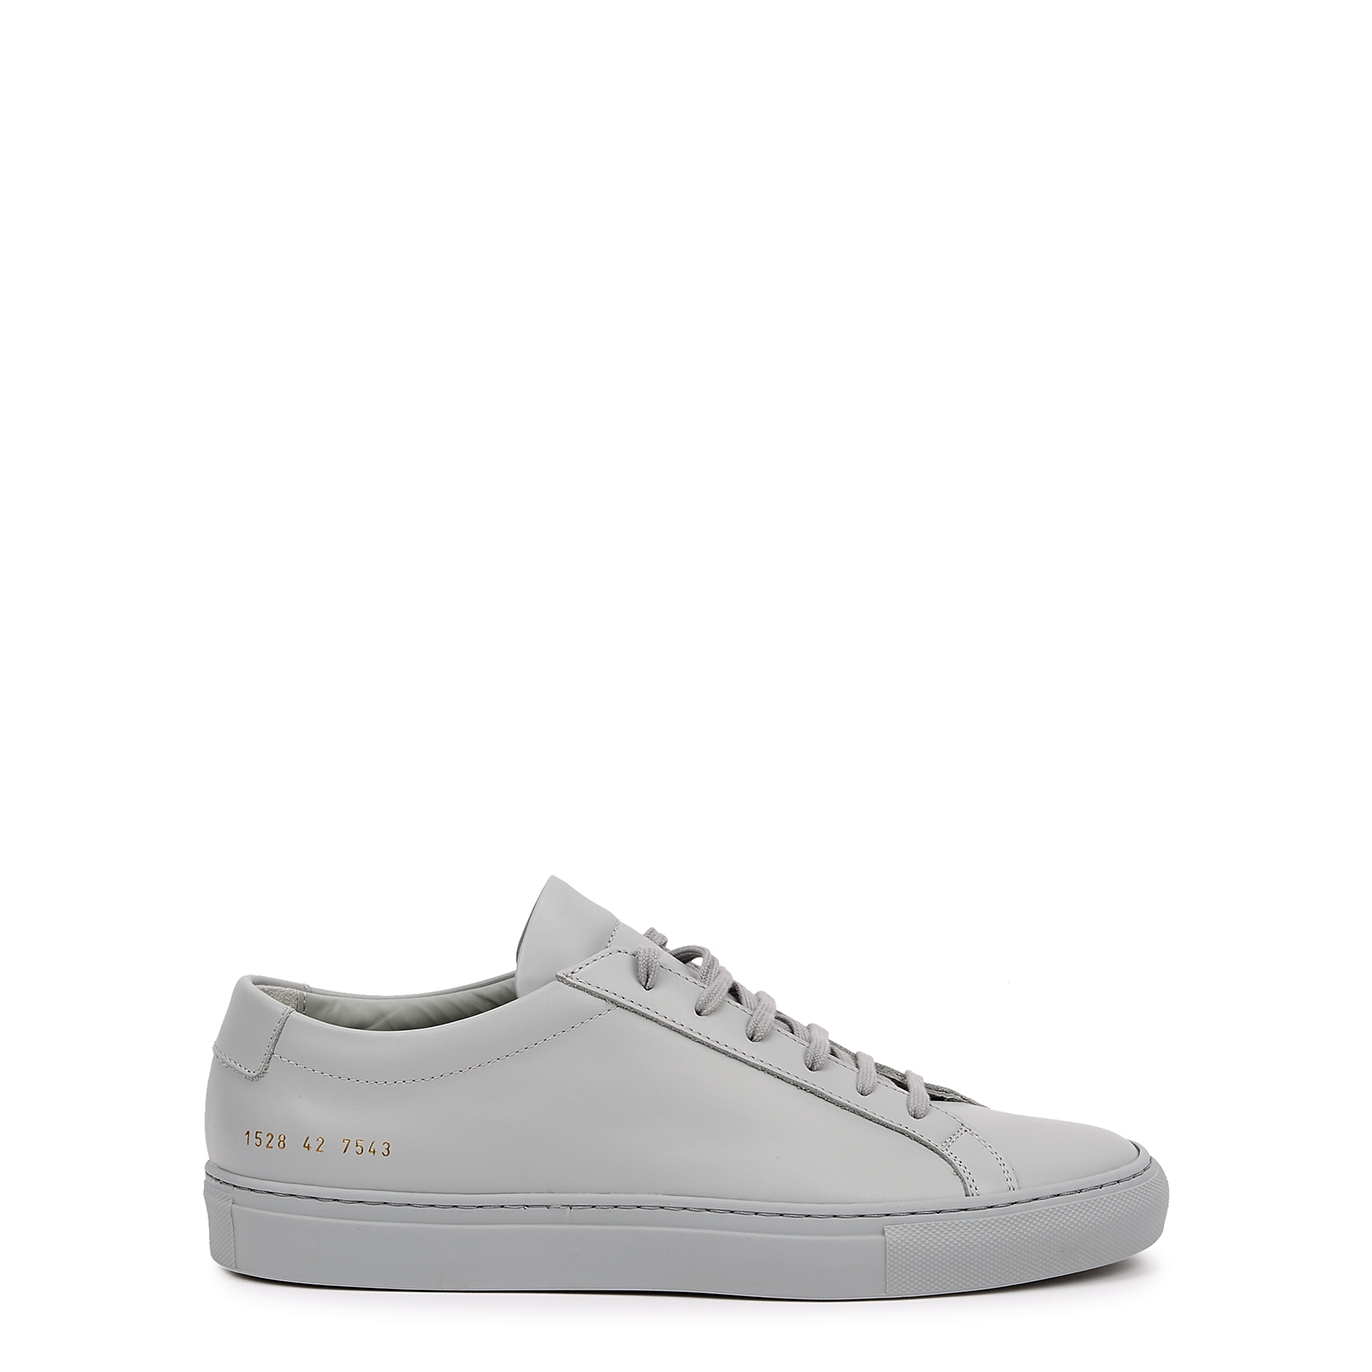 Common Projects Original Achilles Grey Leather Sneakers - 8